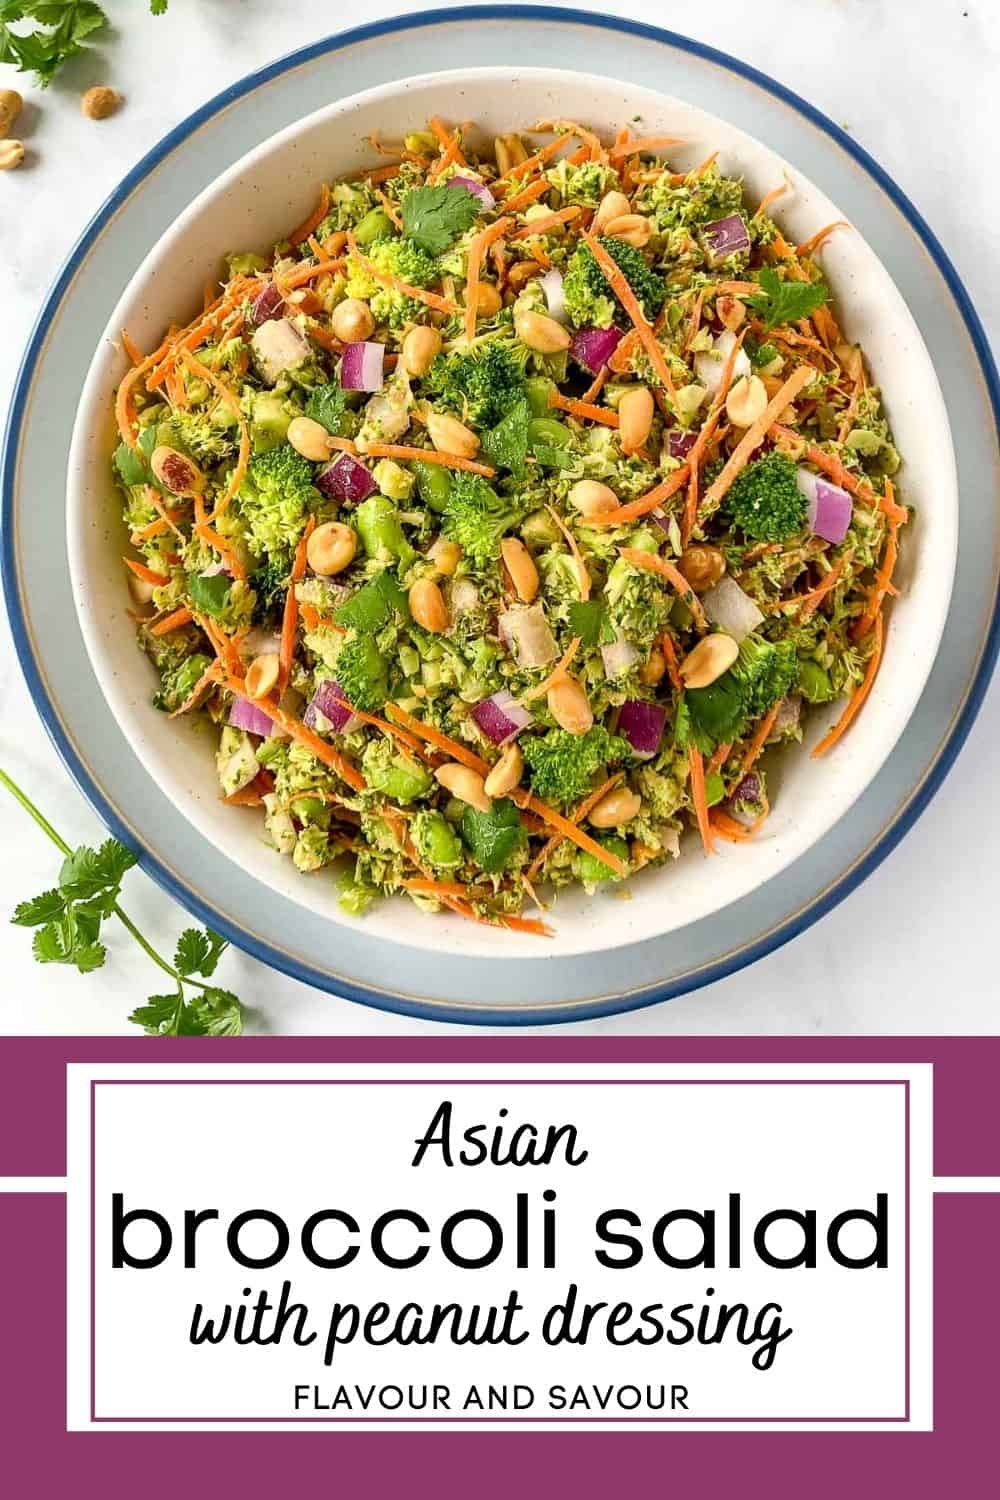 image with text for Asian Broccoli Salad with Peanut Dressing